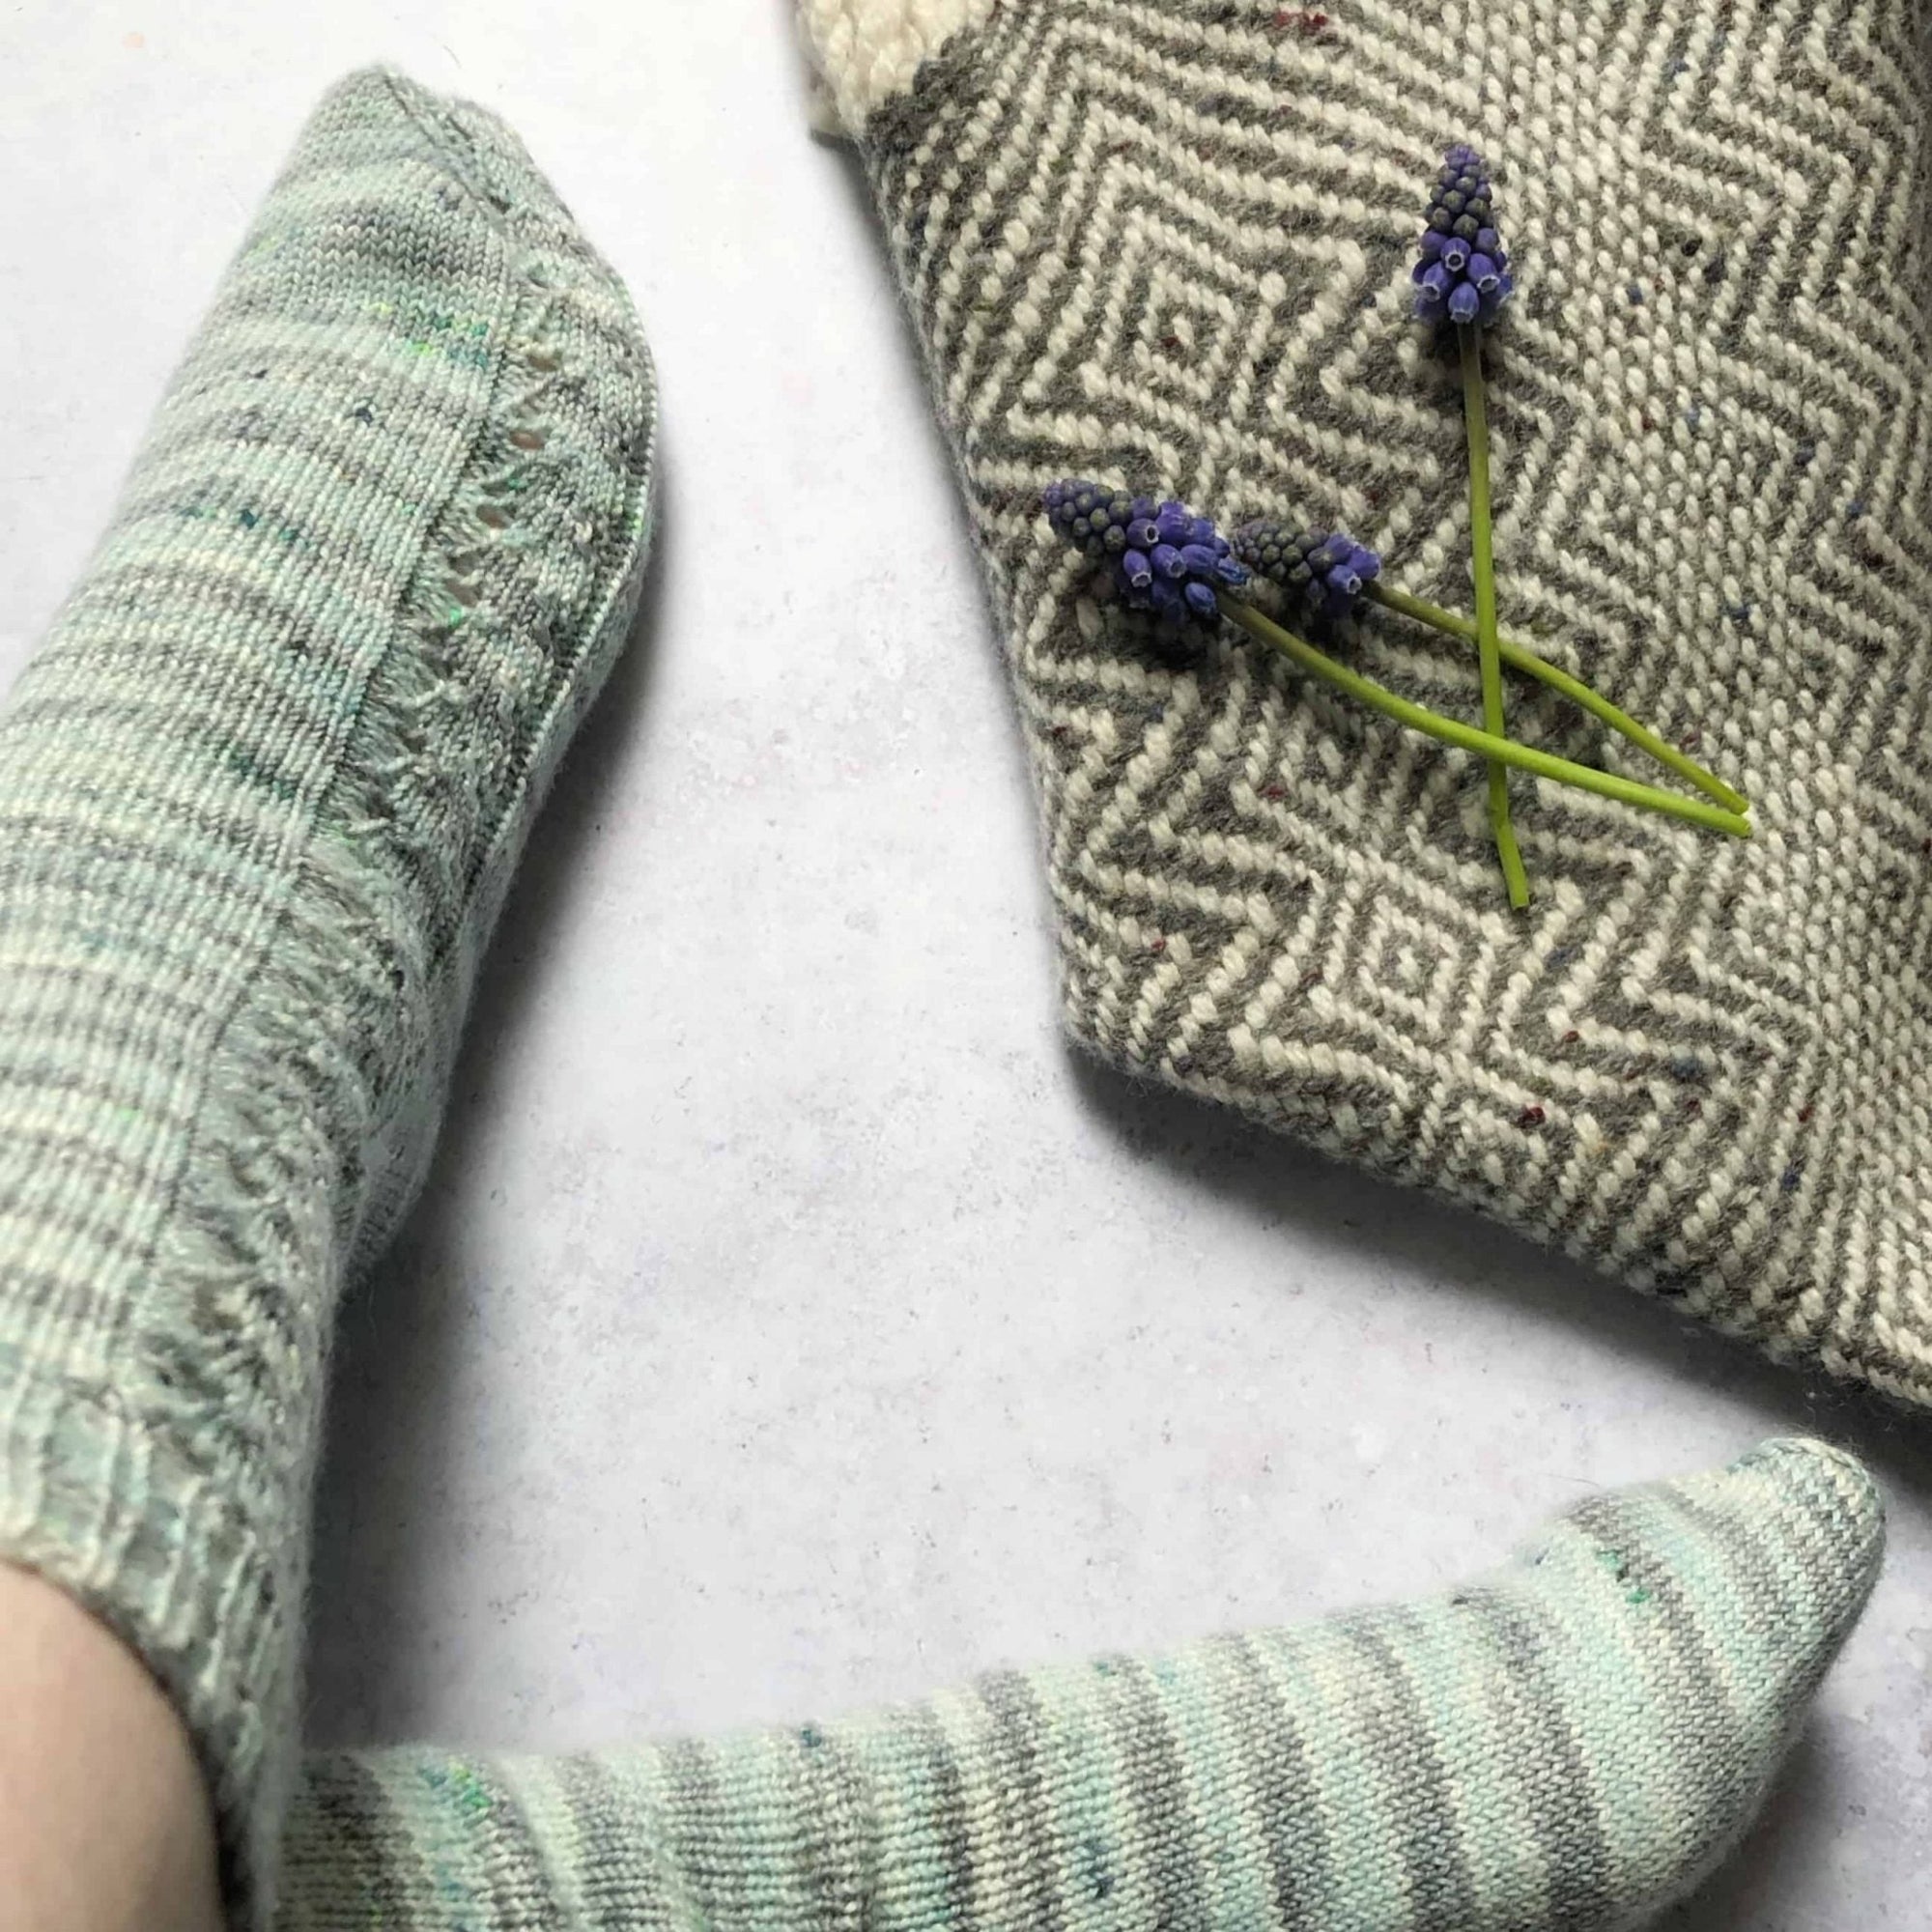 A Special Pale Fire Sock in Clarendon Sock - This is Knit